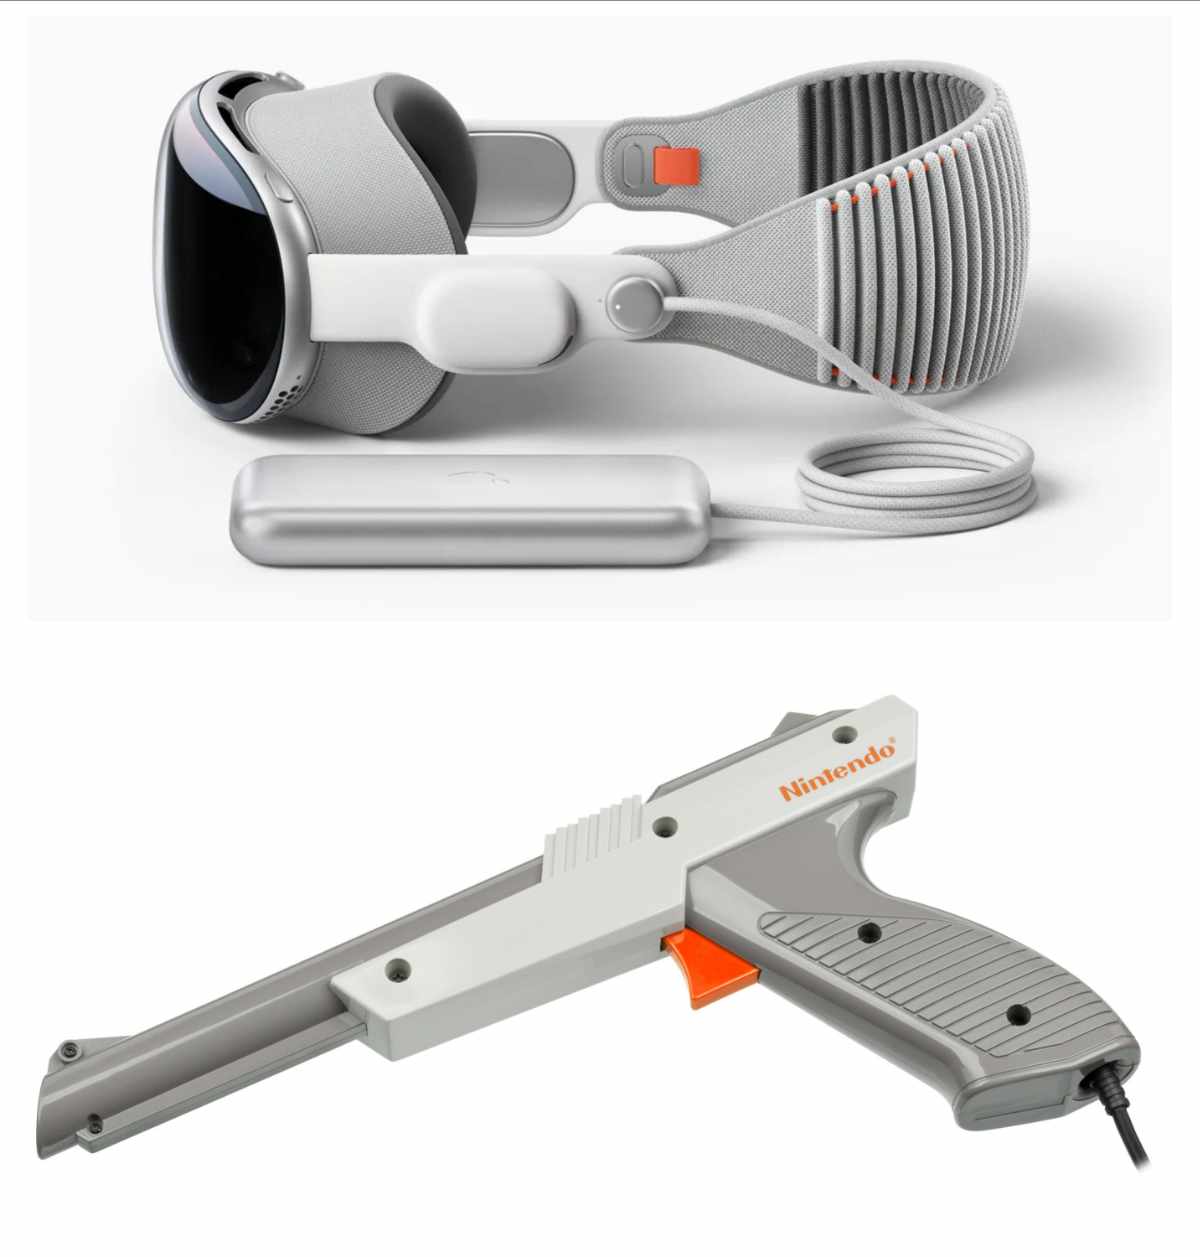 Apple Vision Pro and Nintendo NES Zapper: Separated at birth?